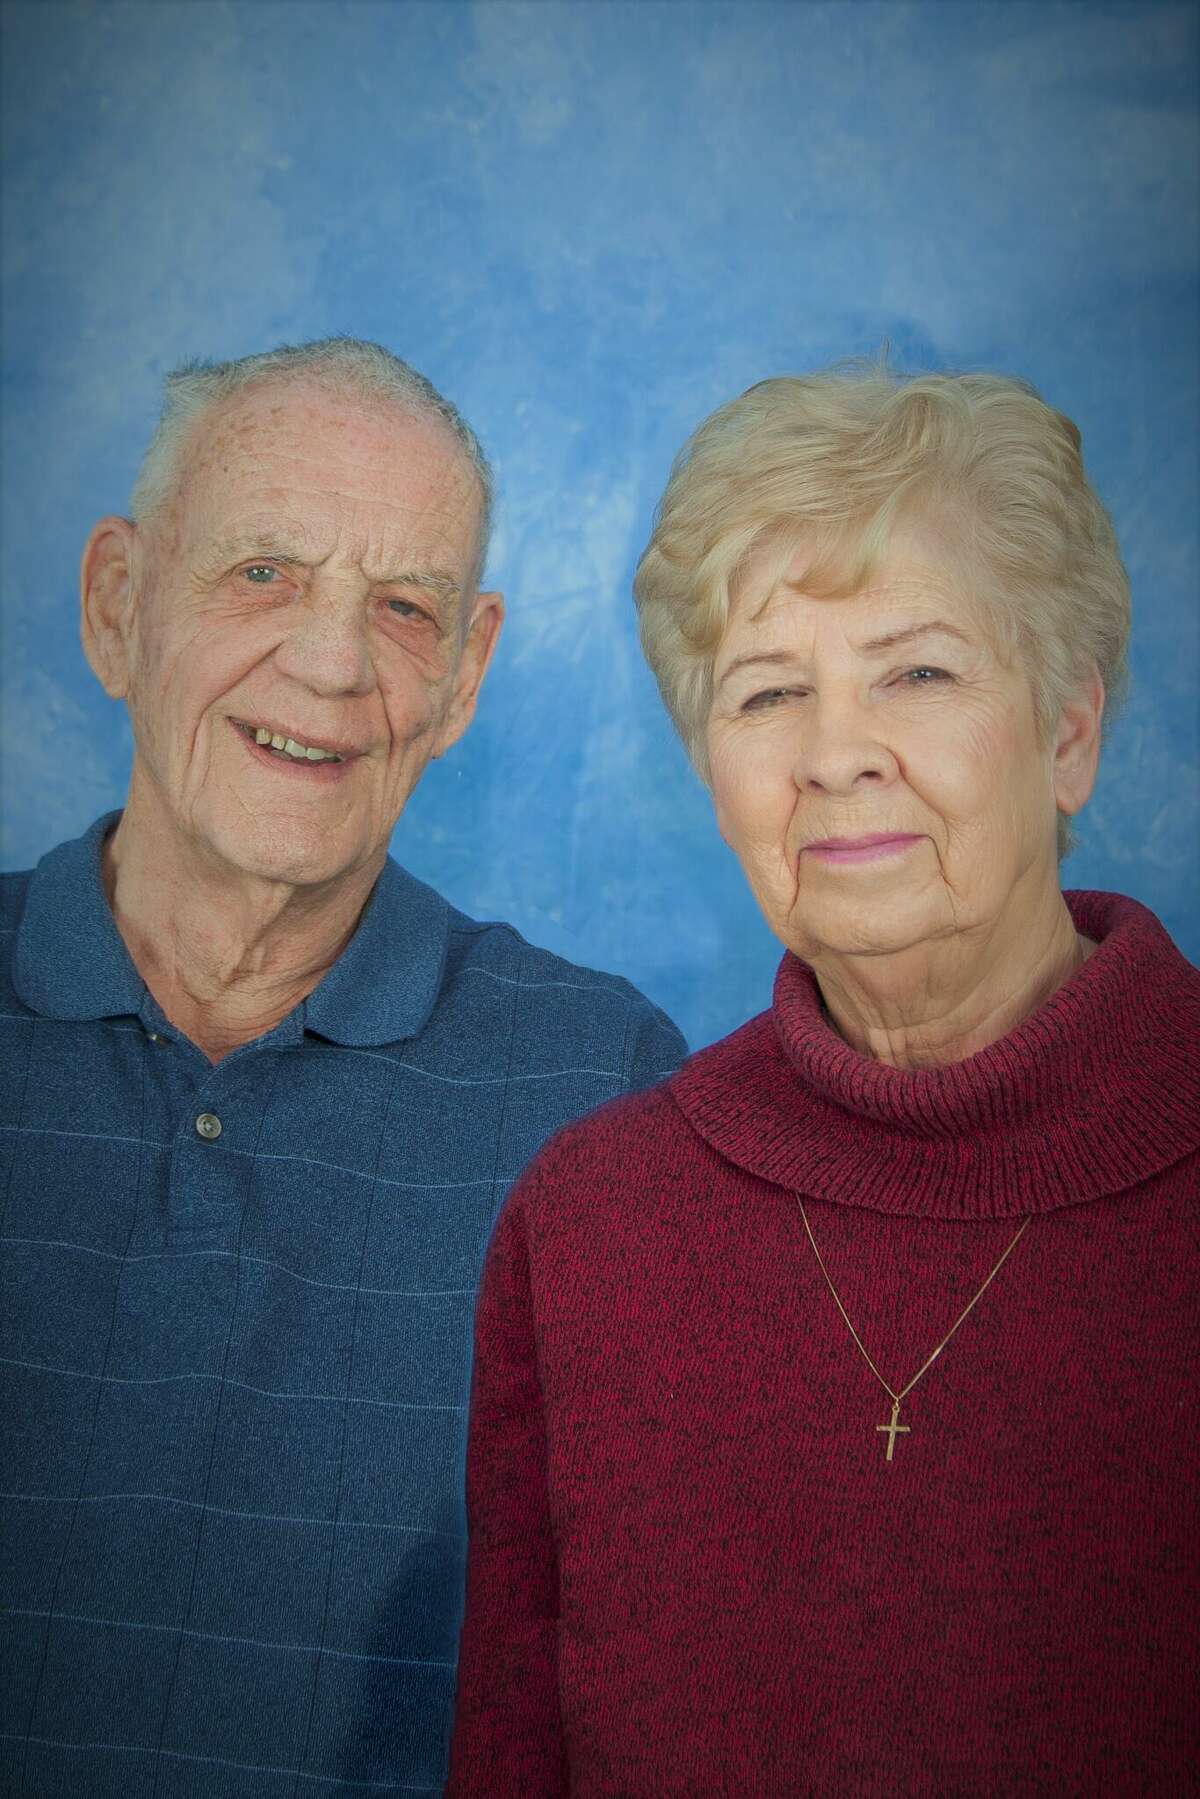 Gerald and Lorraine (Rozeboom) Patrick plan to celebrate their 60th wedding anniversary on March 15.